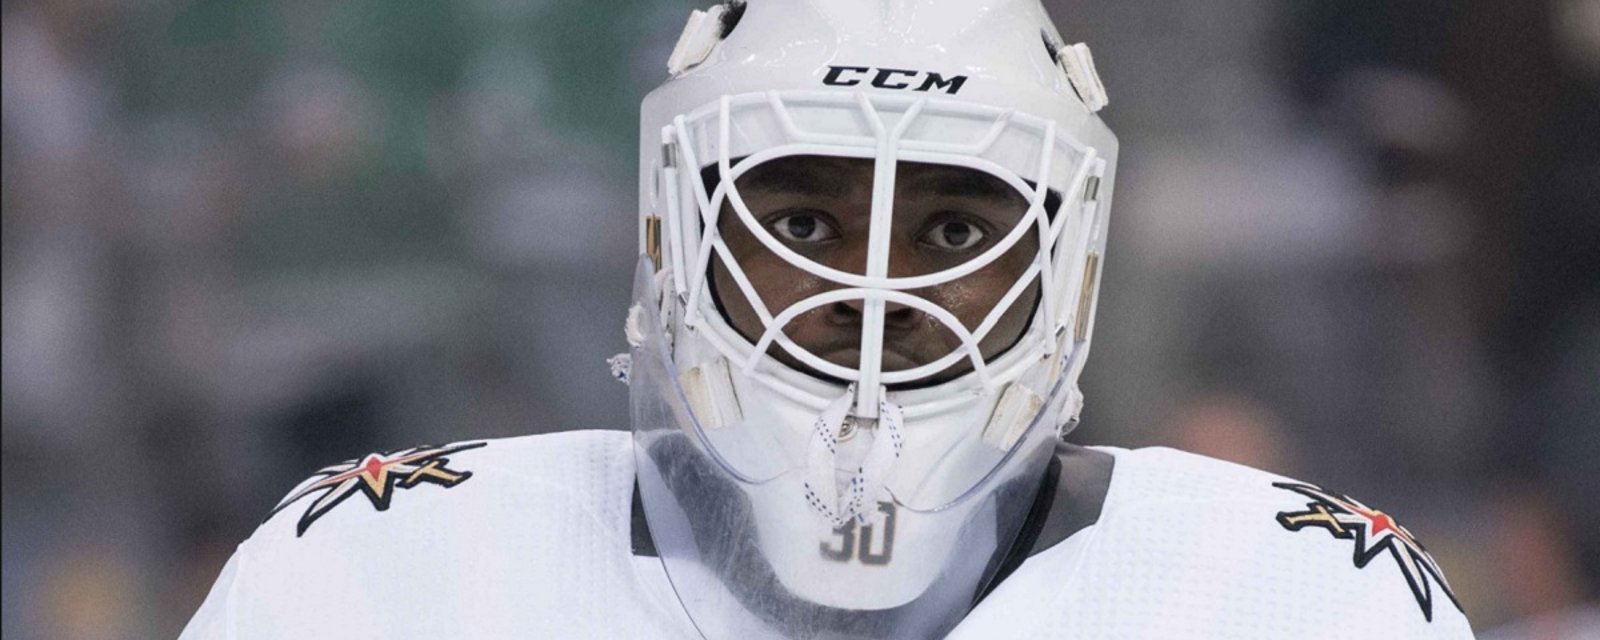 Malcolm Subban may break an obscure Blackhawks record thanks to COVID-19.